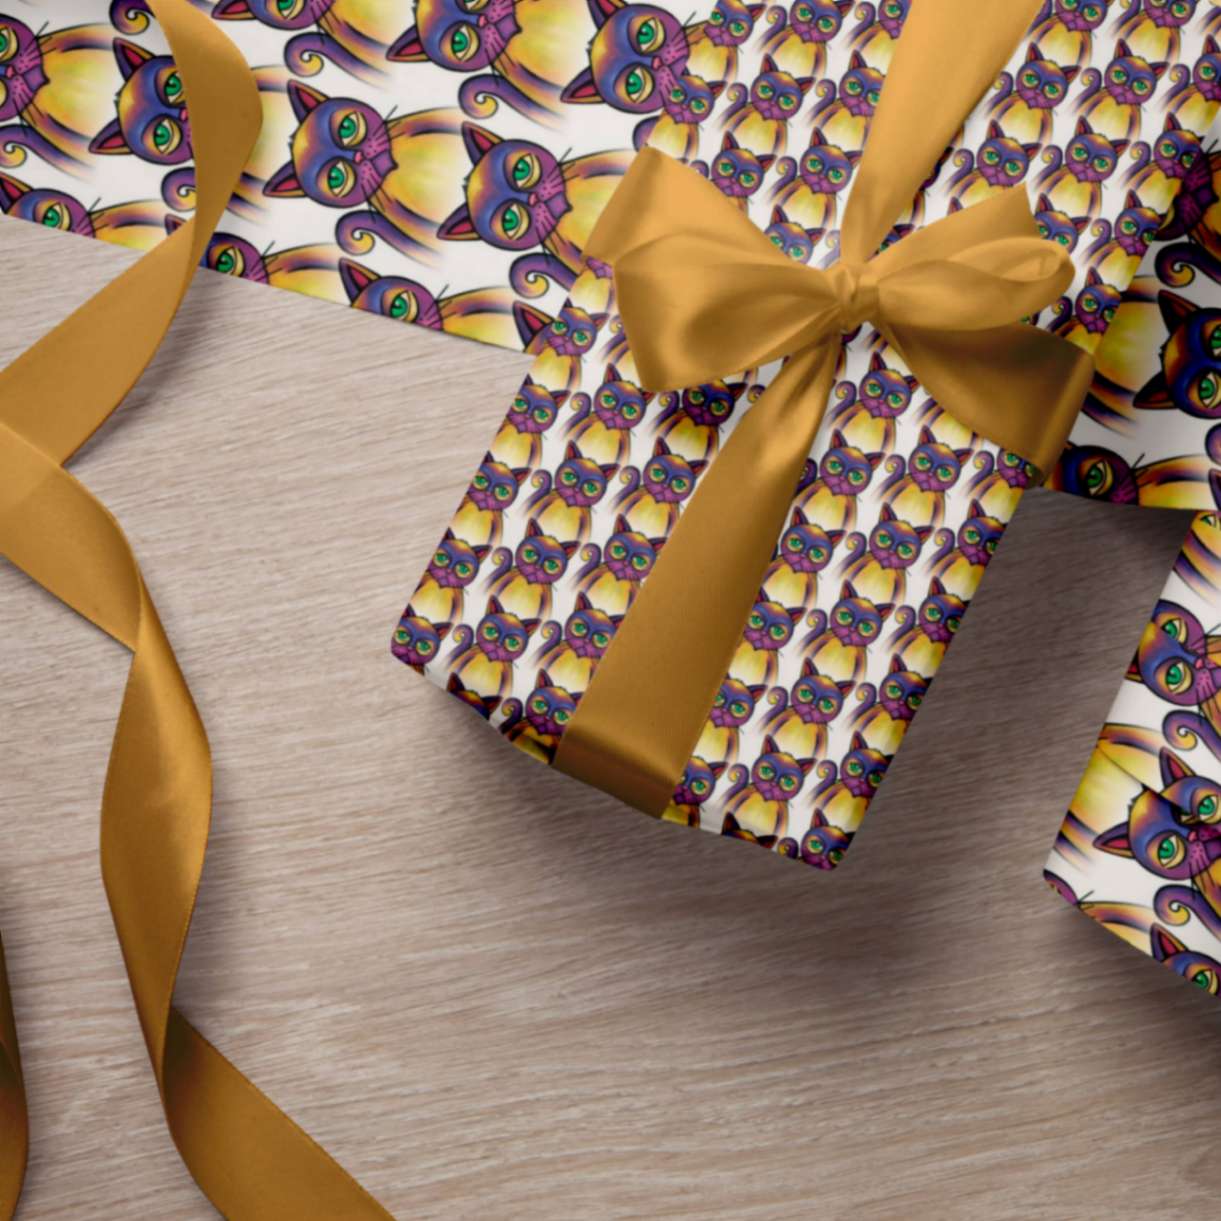 Purple Misfit Cats Wrapping Paper - ZumBuys